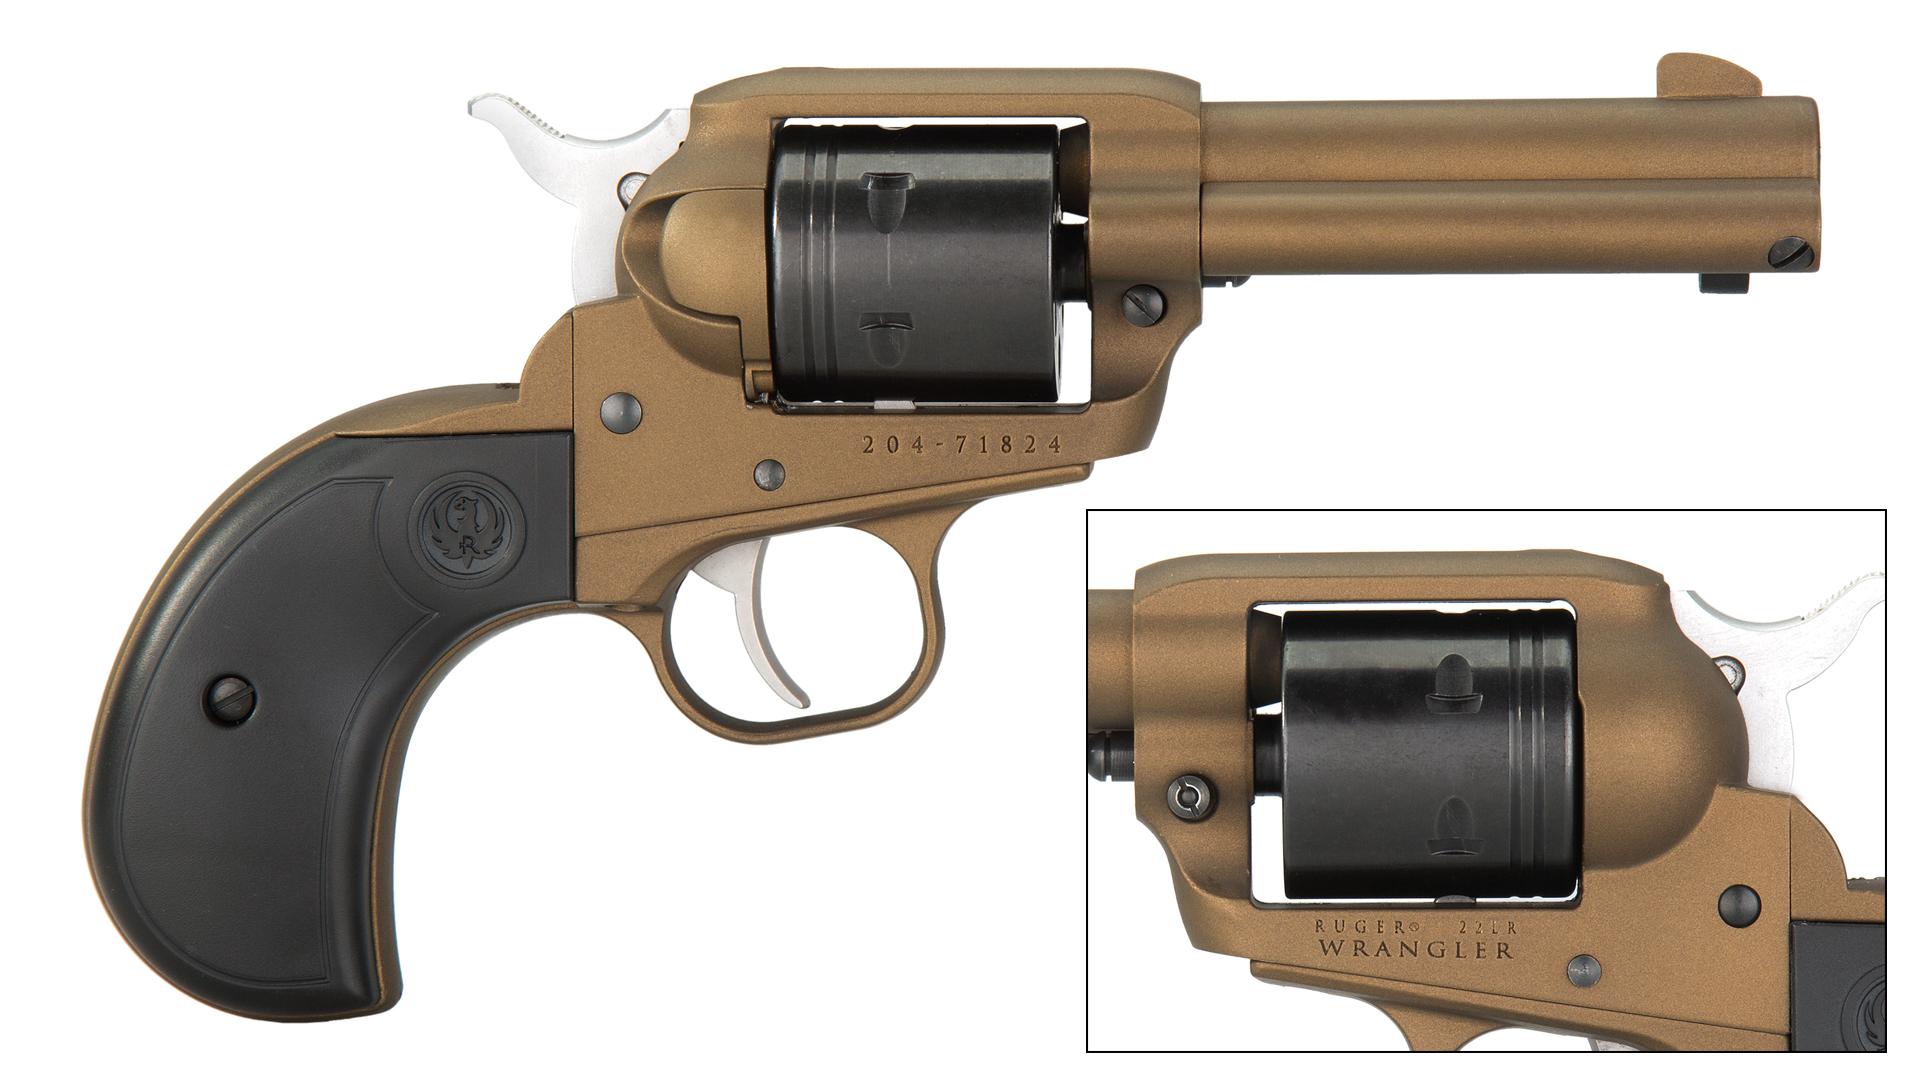 Ruger Wrangler With Birdshead Grip | An Official Journal Of The NRA